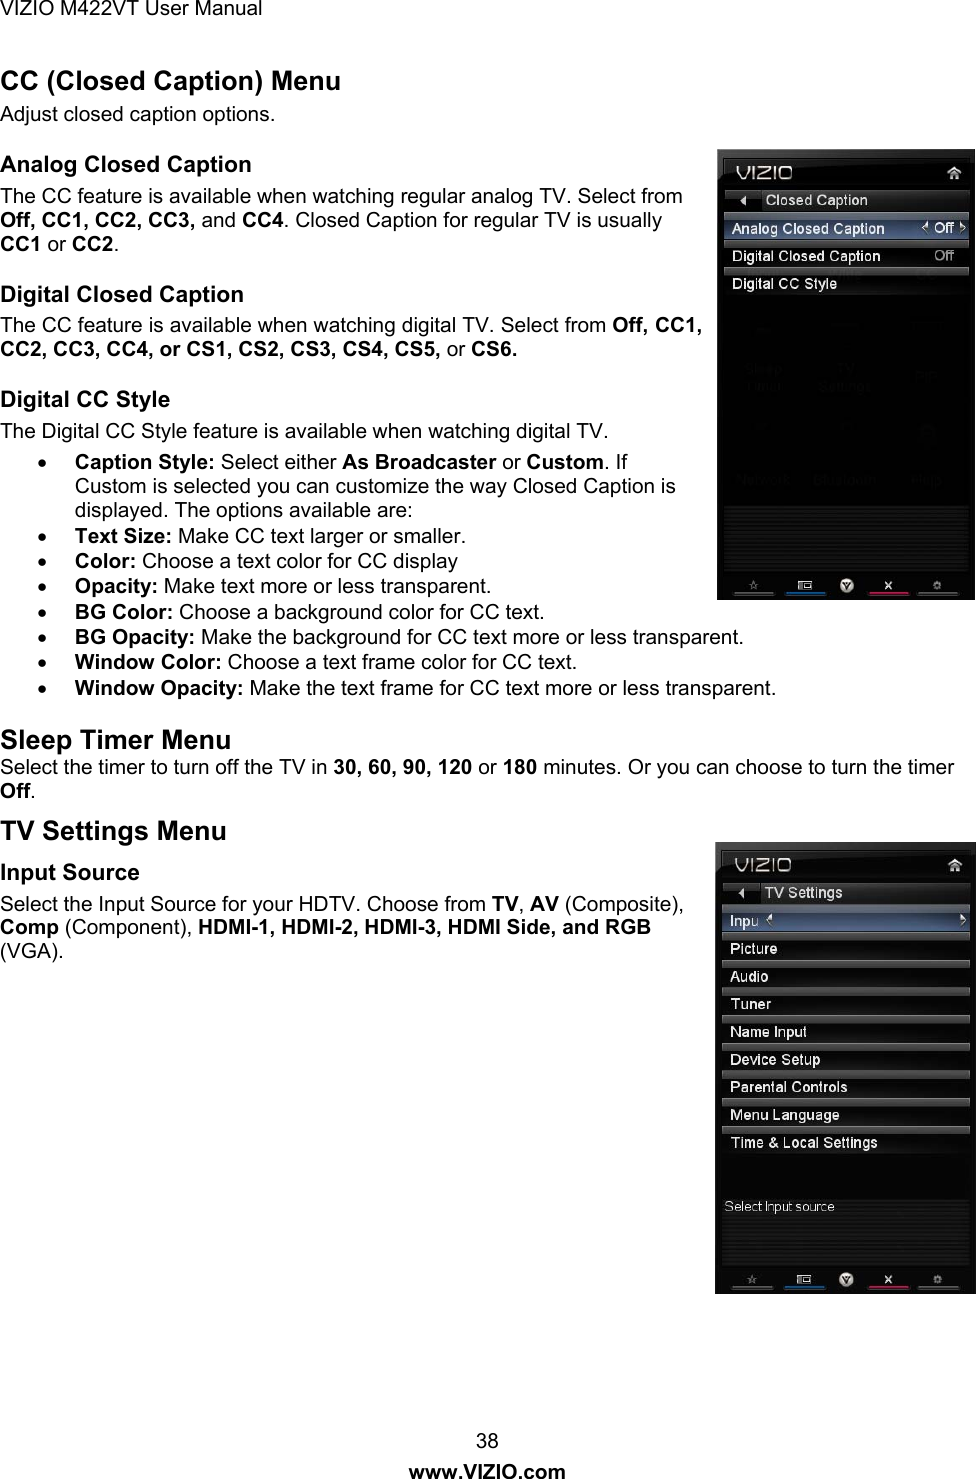 VIZIO M422VT User Manual 38 www.VIZIO.com CC (Closed Caption) Menu Adjust closed caption options.  Analog Closed Caption The CC feature is available when watching regular analog TV. Select from Off, CC1, CC2, CC3, and CC4. Closed Caption for regular TV is usually CC1 or CC2. Digital Closed Caption The CC feature is available when watching digital TV. Select from Off, CC1, CC2, CC3, CC4, or CS1, CS2, CS3, CS4, CS5, or CS6.  Digital CC Style The Digital CC Style feature is available when watching digital TV. • Caption Style: Select either As Broadcaster or Custom. If Custom is selected you can customize the way Closed Caption is displayed. The options available are: • Text Size: Make CC text larger or smaller.  • Color: Choose a text color for CC display • Opacity: Make text more or less transparent. • BG Color: Choose a background color for CC text. • BG Opacity: Make the background for CC text more or less transparent. • Window Color: Choose a text frame color for CC text. • Window Opacity: Make the text frame for CC text more or less transparent.  Sleep Timer Menu Select the timer to turn off the TV in 30, 60, 90, 120 or 180 minutes. Or you can choose to turn the timer Off. TV Settings Menu Input Source Select the Input Source for your HDTV. Choose from TV, AV (Composite), Comp (Component), HDMI-1, HDMI-2, HDMI-3, HDMI Side, and RGB (VGA). 